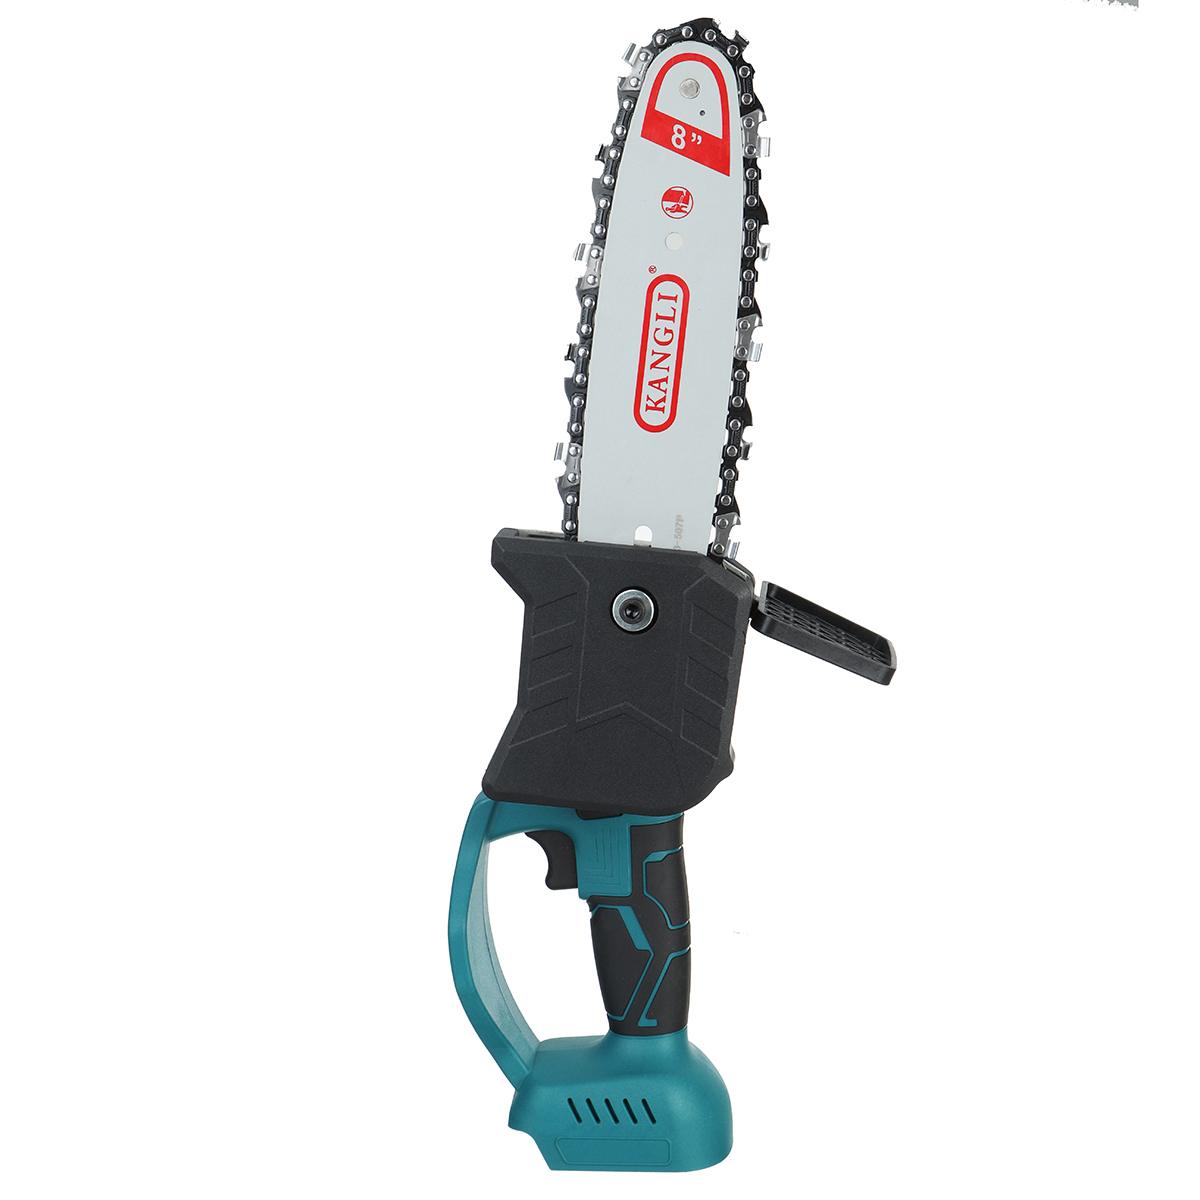 8in10in-1500W-Electric-Chain-Saw-Handheld-Logging-Saw-For-Makita-18V21V-Battery-1805939-9